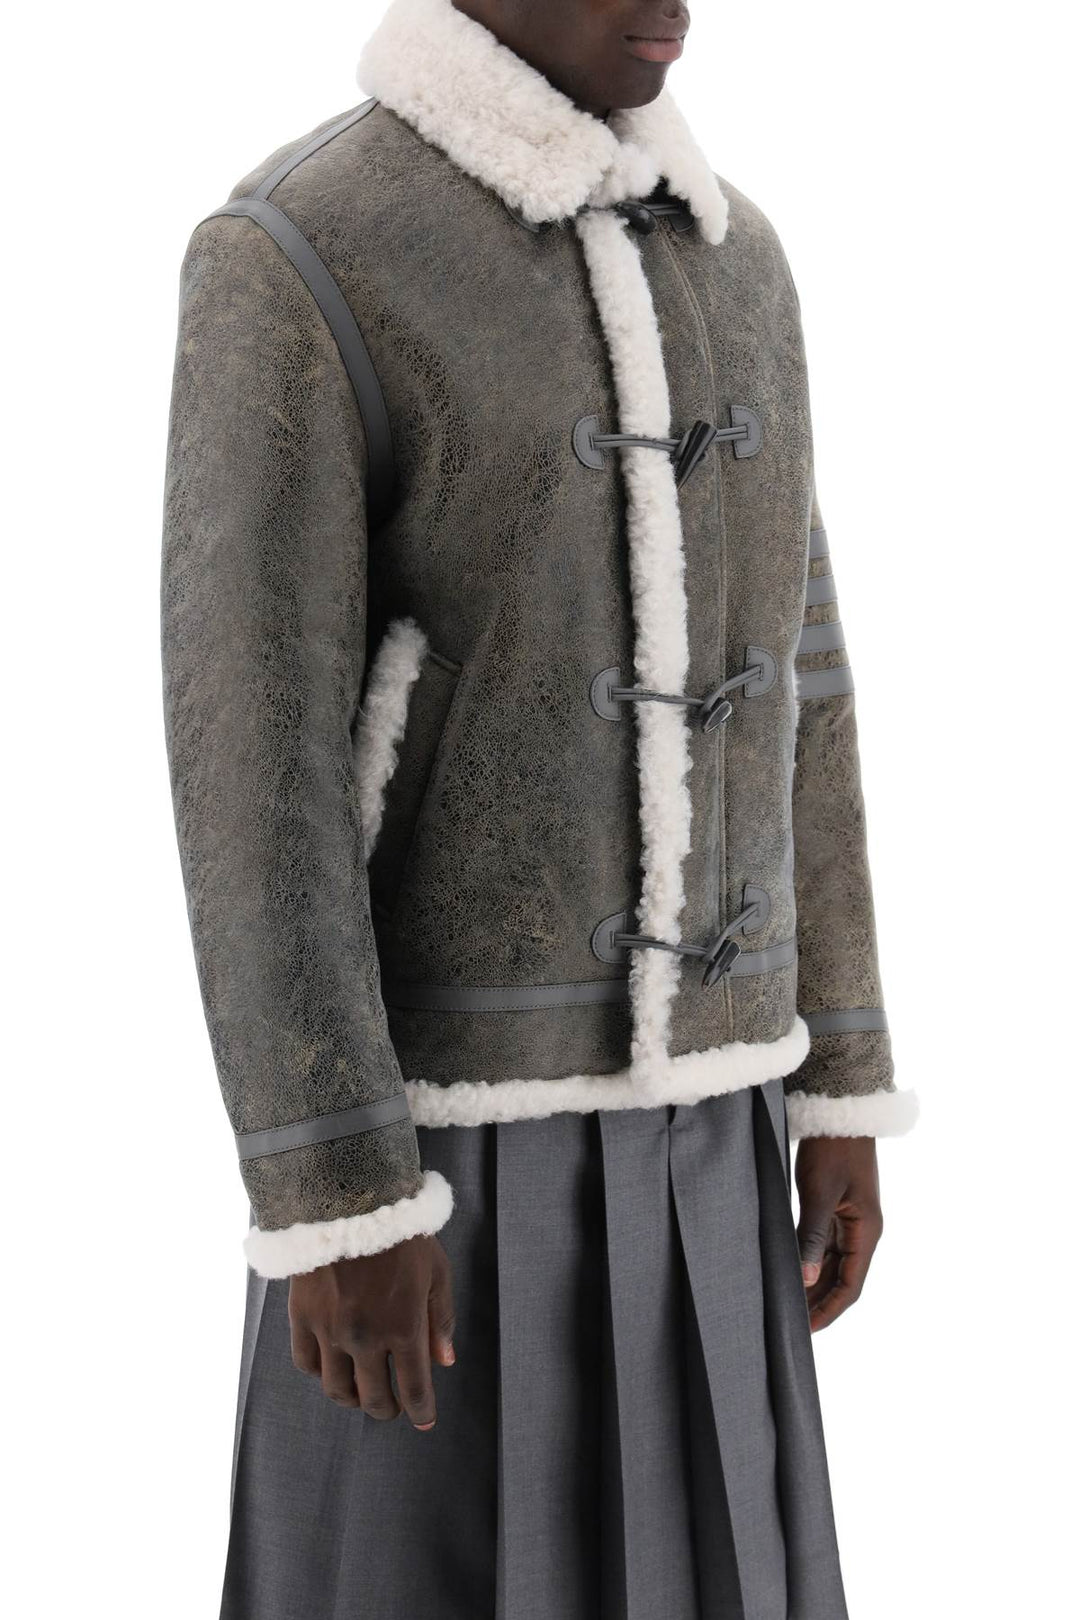 Thom Browne Shearling Cropped Montgomery Jacket   Grey